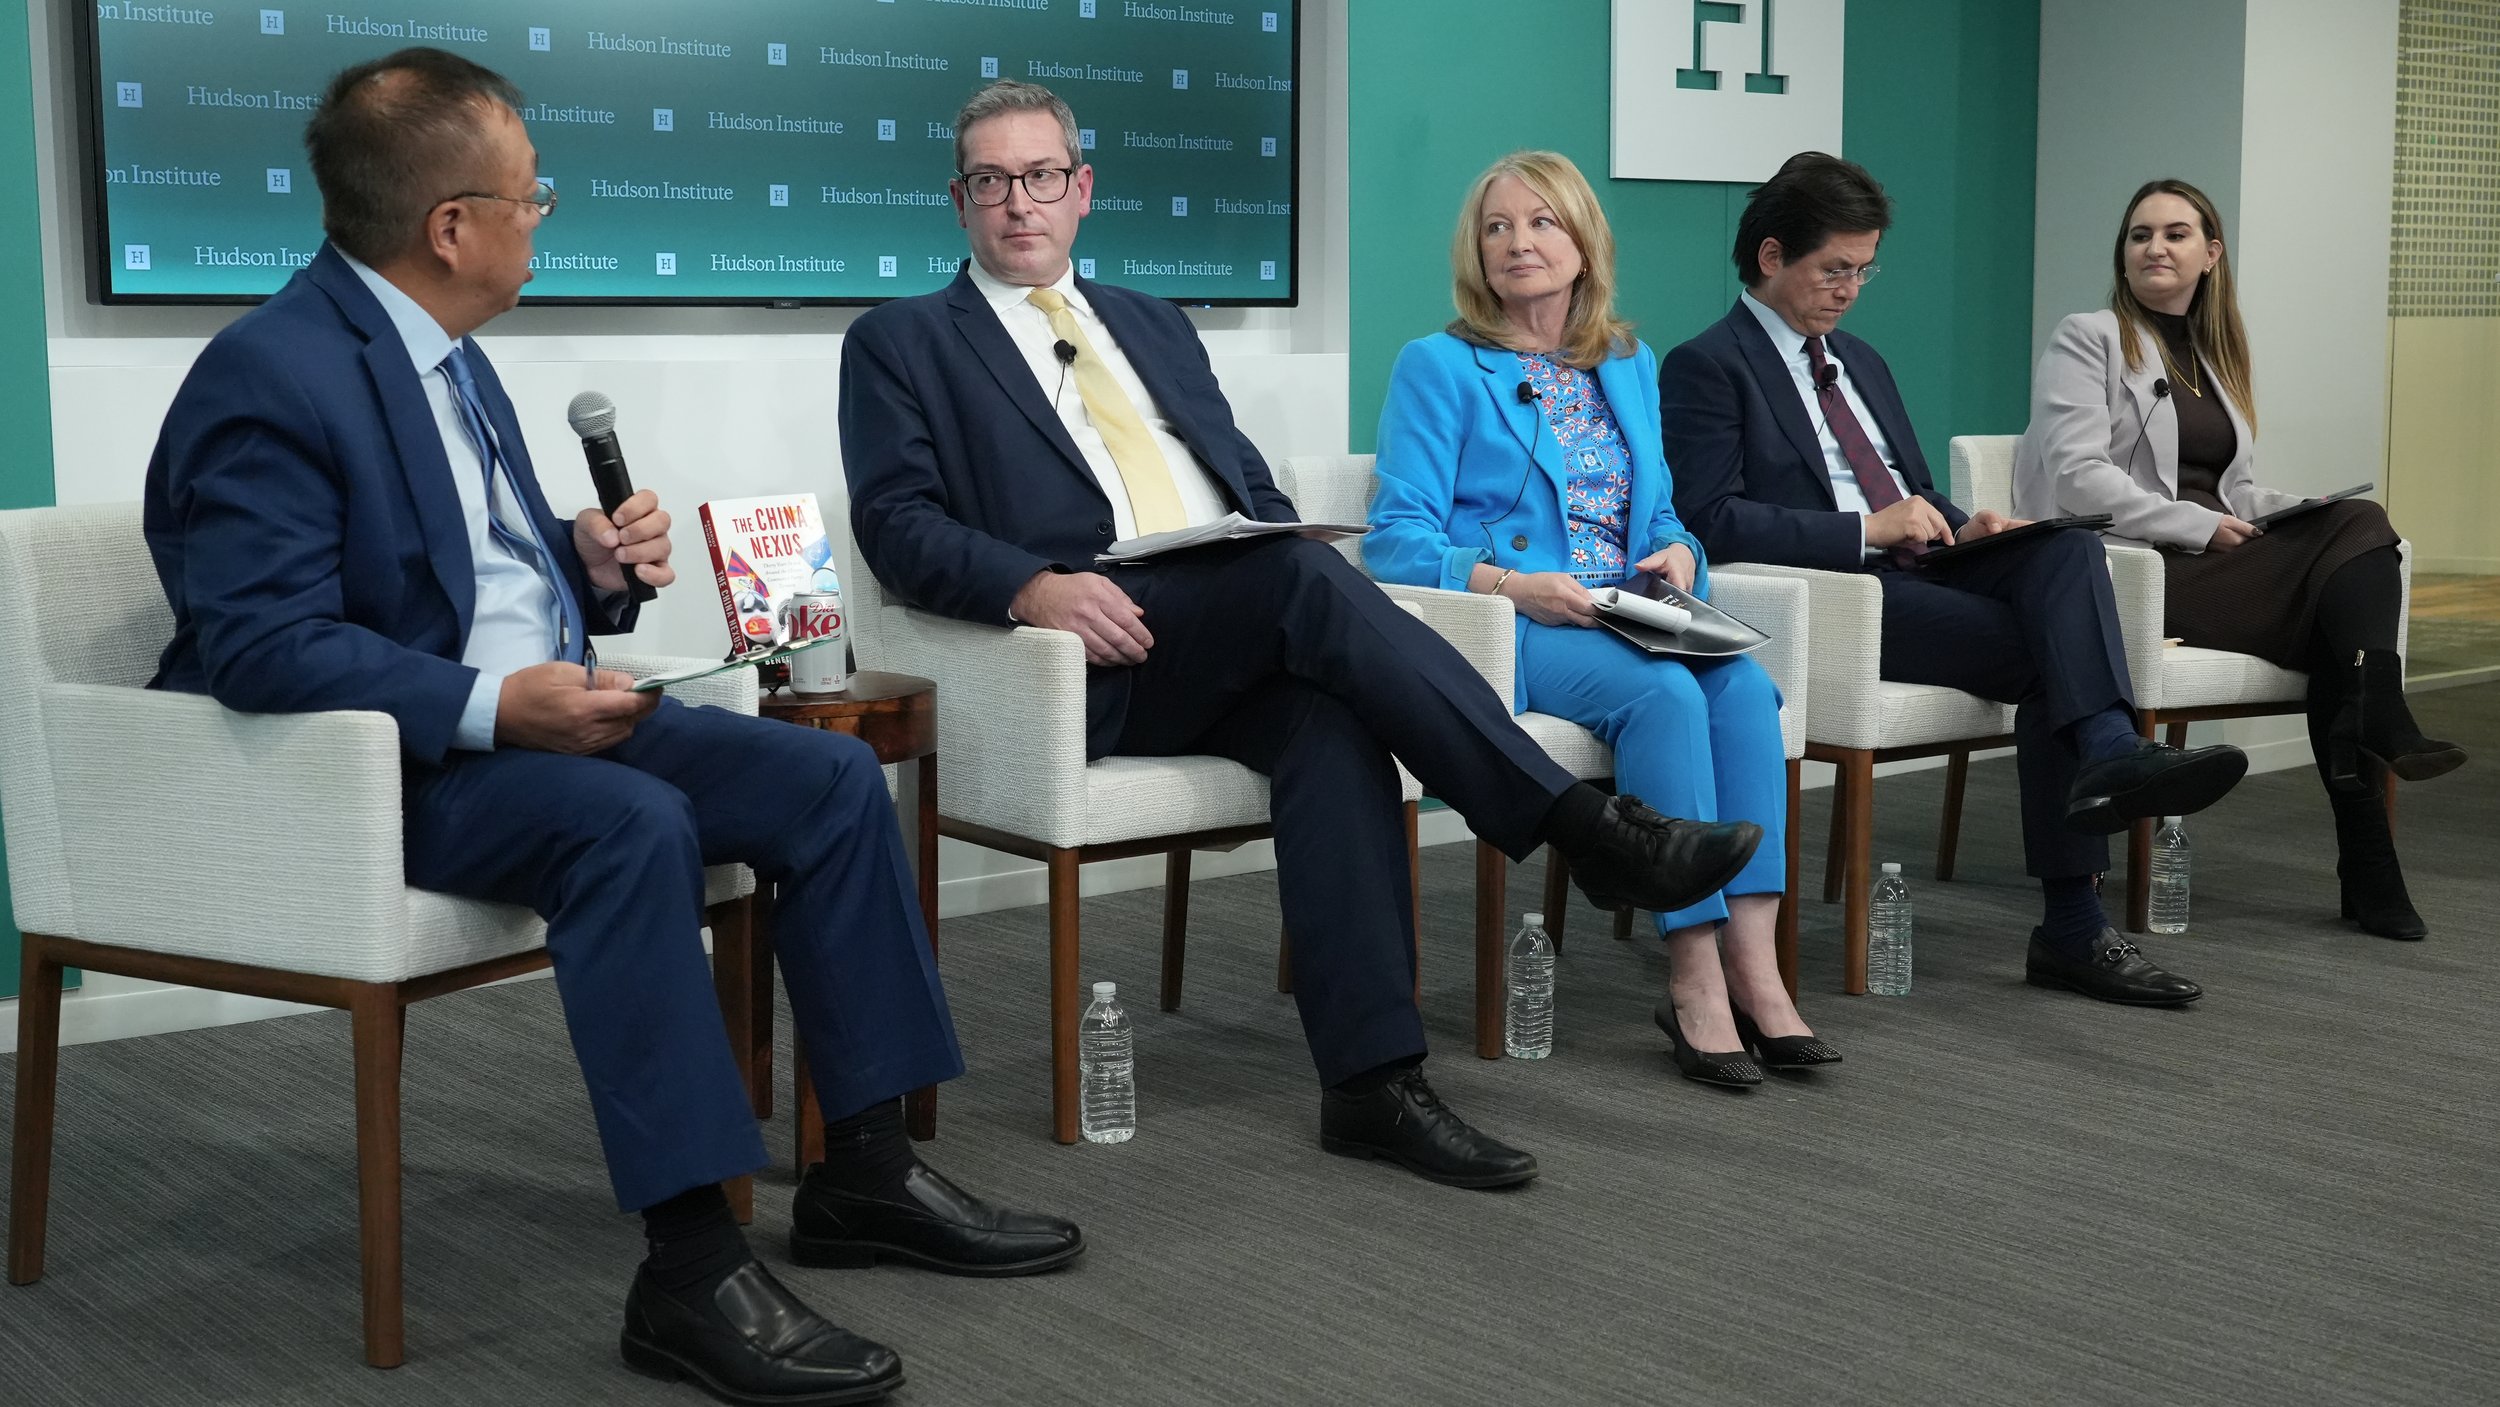 The panel discussion at Hudson Institute with Miles Yu, Benedict Rogers, Nina Shea, Nury Turkel and Olivia Enos.jpg